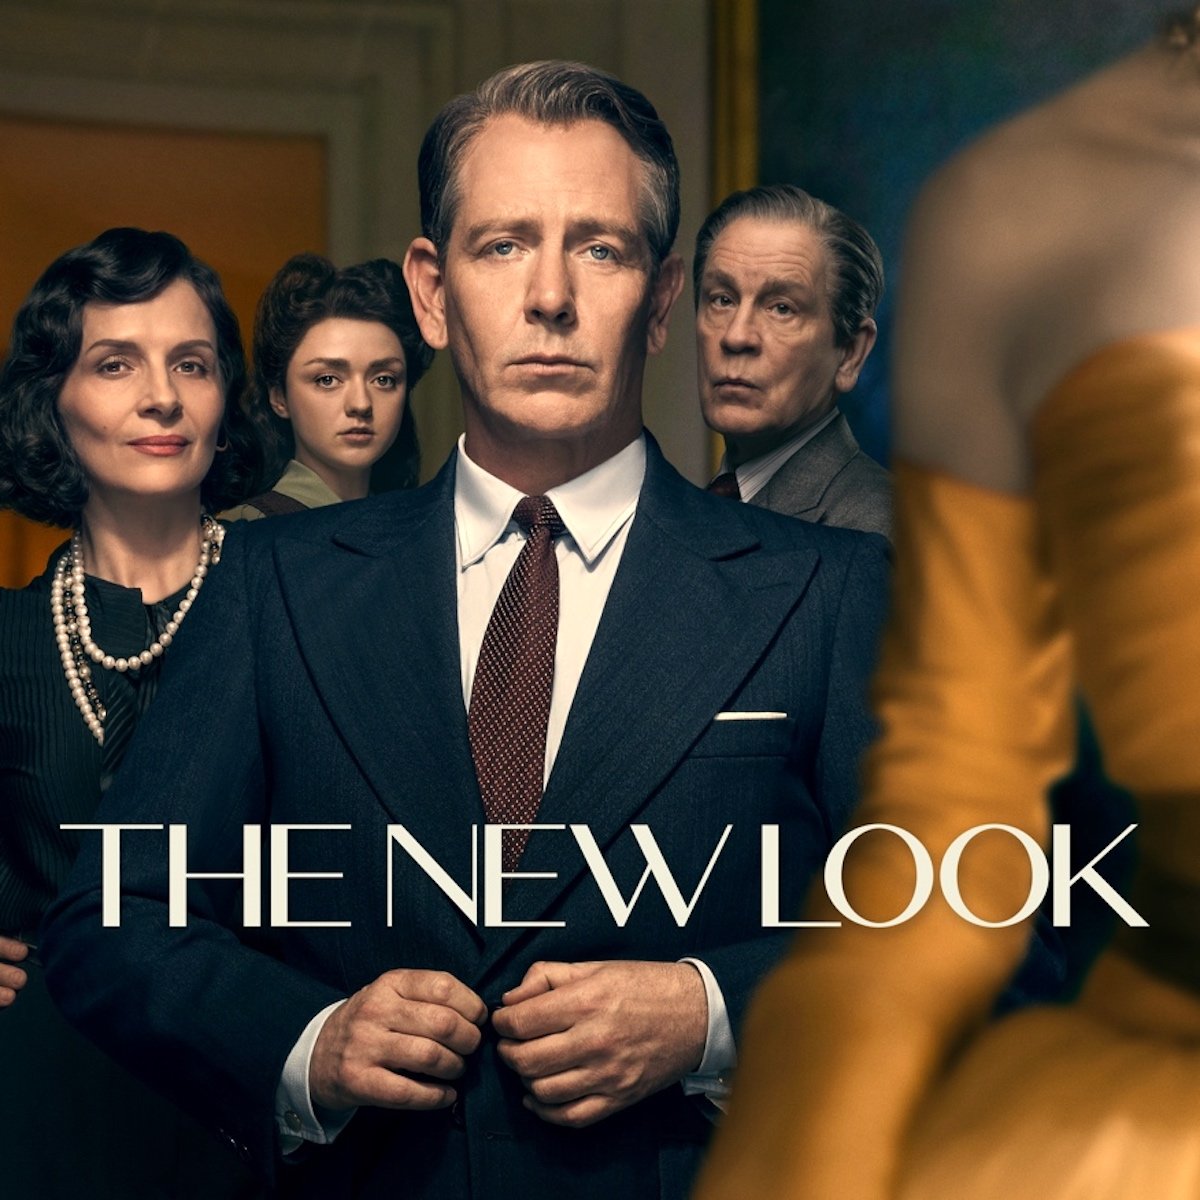 Ben Mendelsohn is front and center with Juliette Binoche, Maisie Williams, and John Malkocich behind them, with everyone dressed well in a poster for Apple TV+'s The New Look